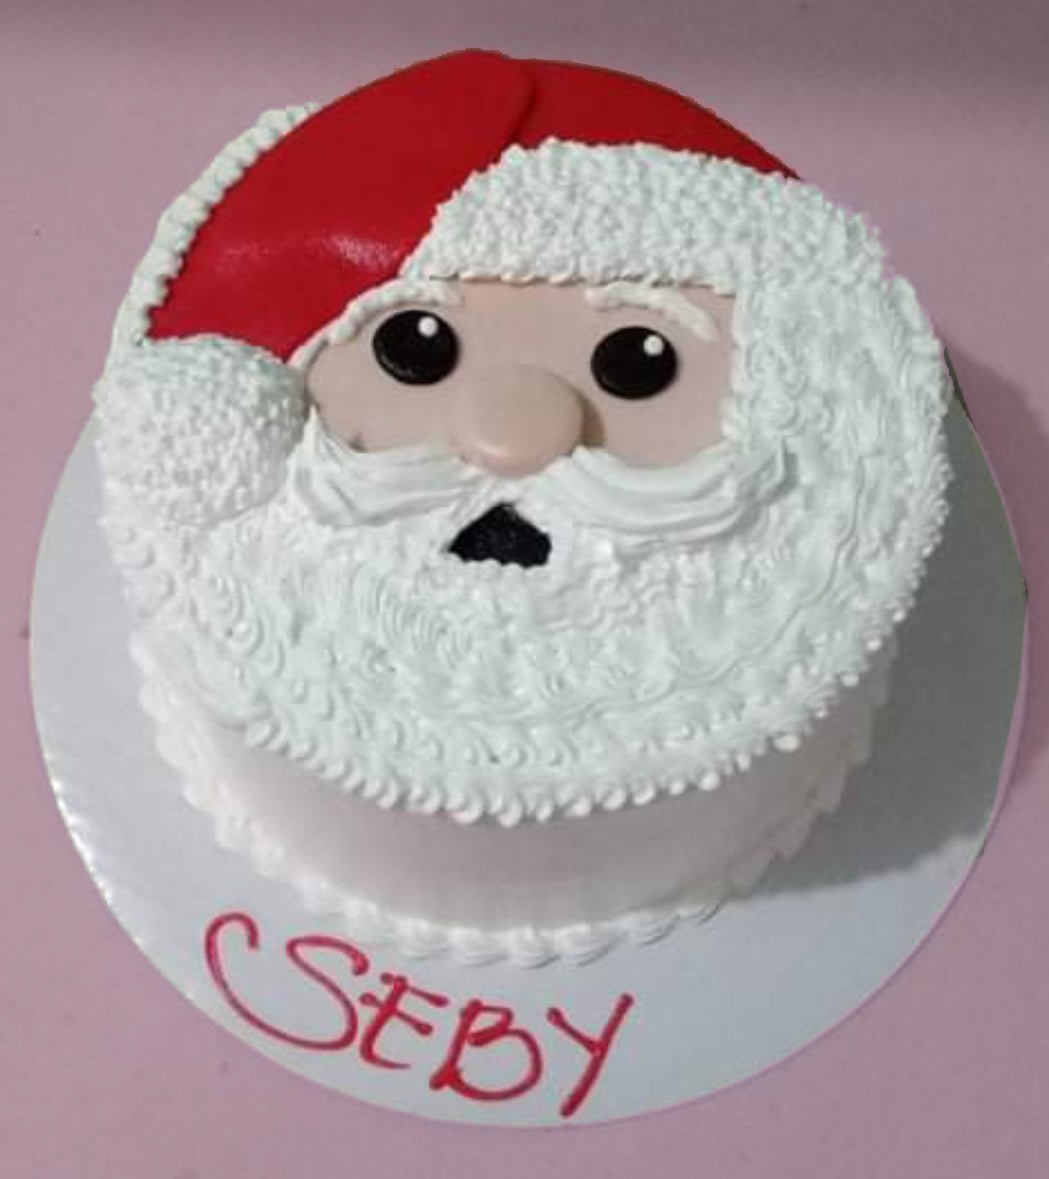 Christmas Cake With Merry Christmas Plate Holly Ornament Santa Claus Doll  Stock Photo - Download Image Now - iStock